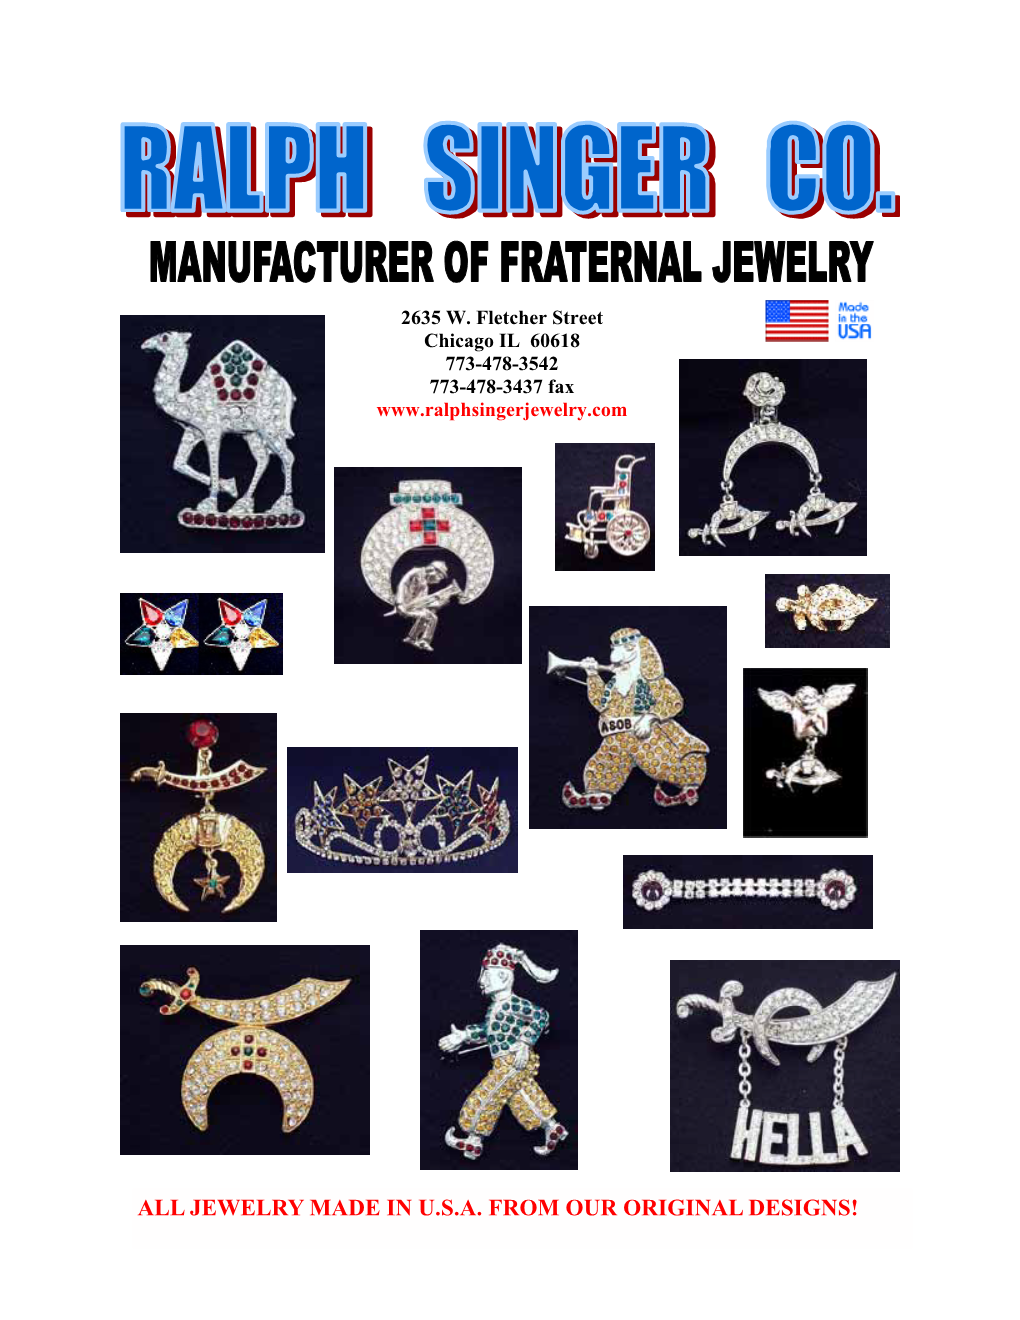 Jewelry Made in Usa from Our Original Designs!